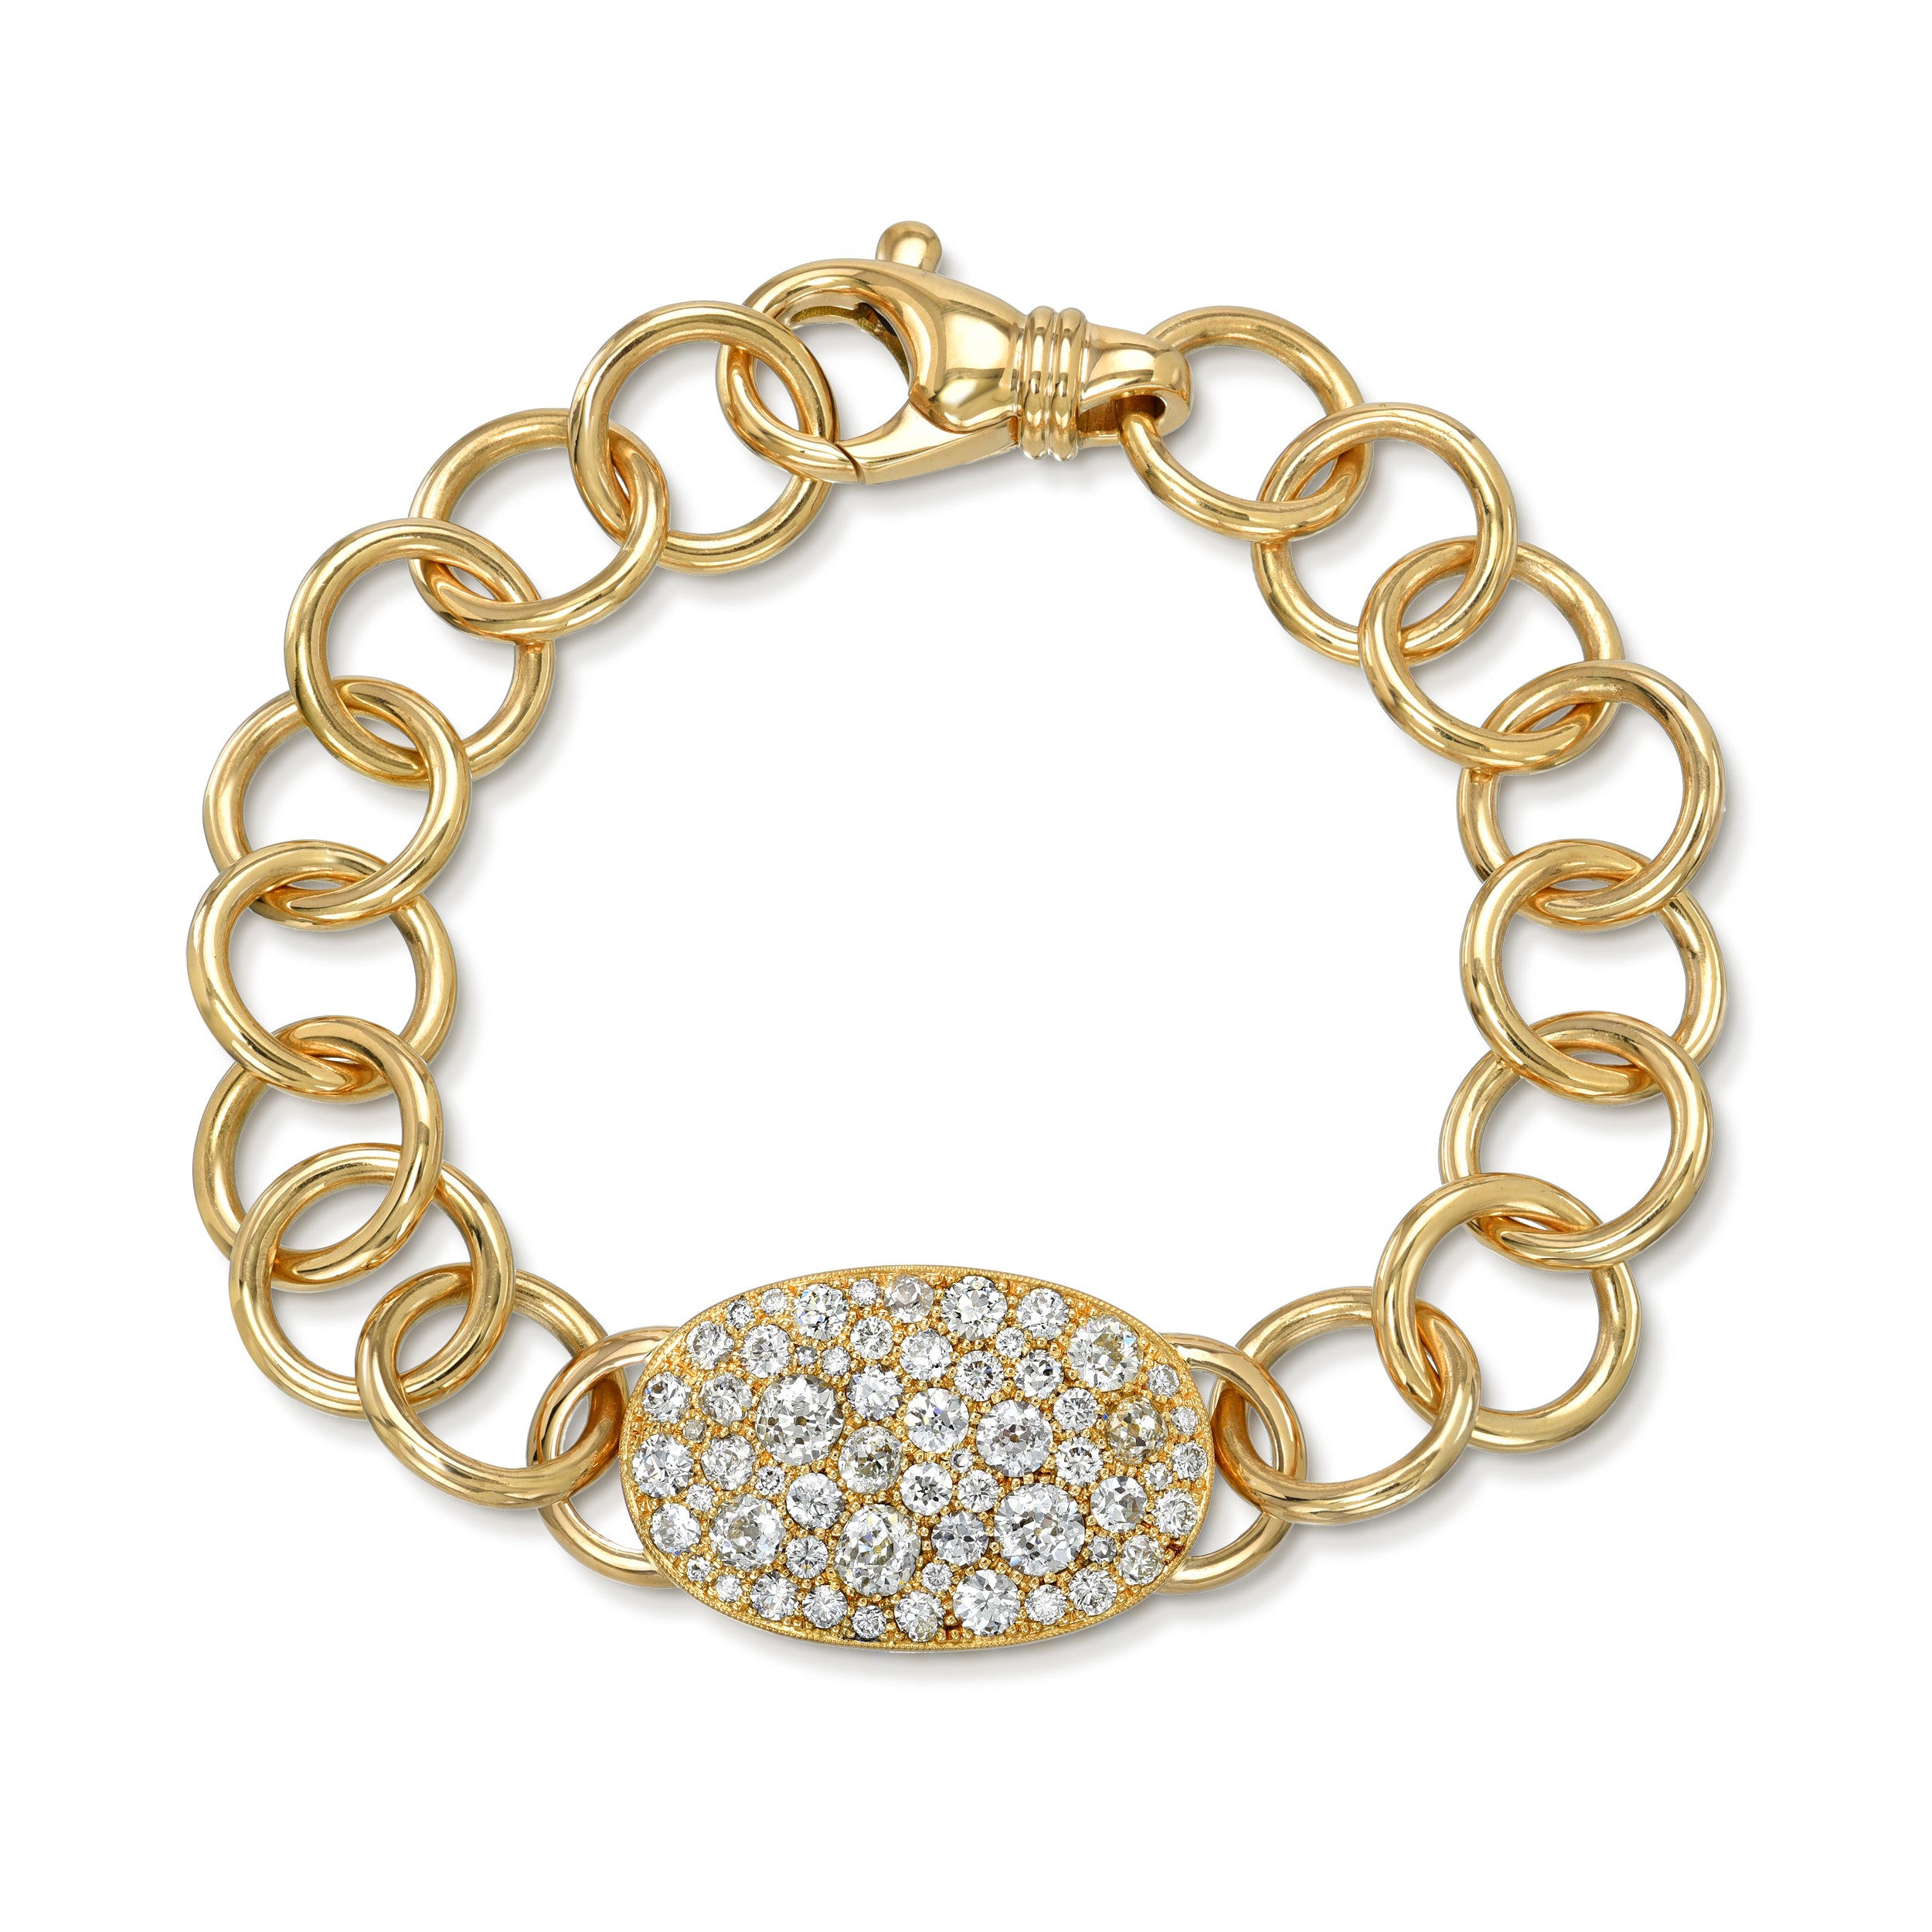 SINGLE STONE COBBLESTONE CLUB BRACELET featuring Approximately 3.55ctw various old cut and round brilliant cut diamonds set in a handcrafted 18K gold plate on our 18K gold club bracelet. Available in an oxidized or polished finish. Bracelet measures 7.75"